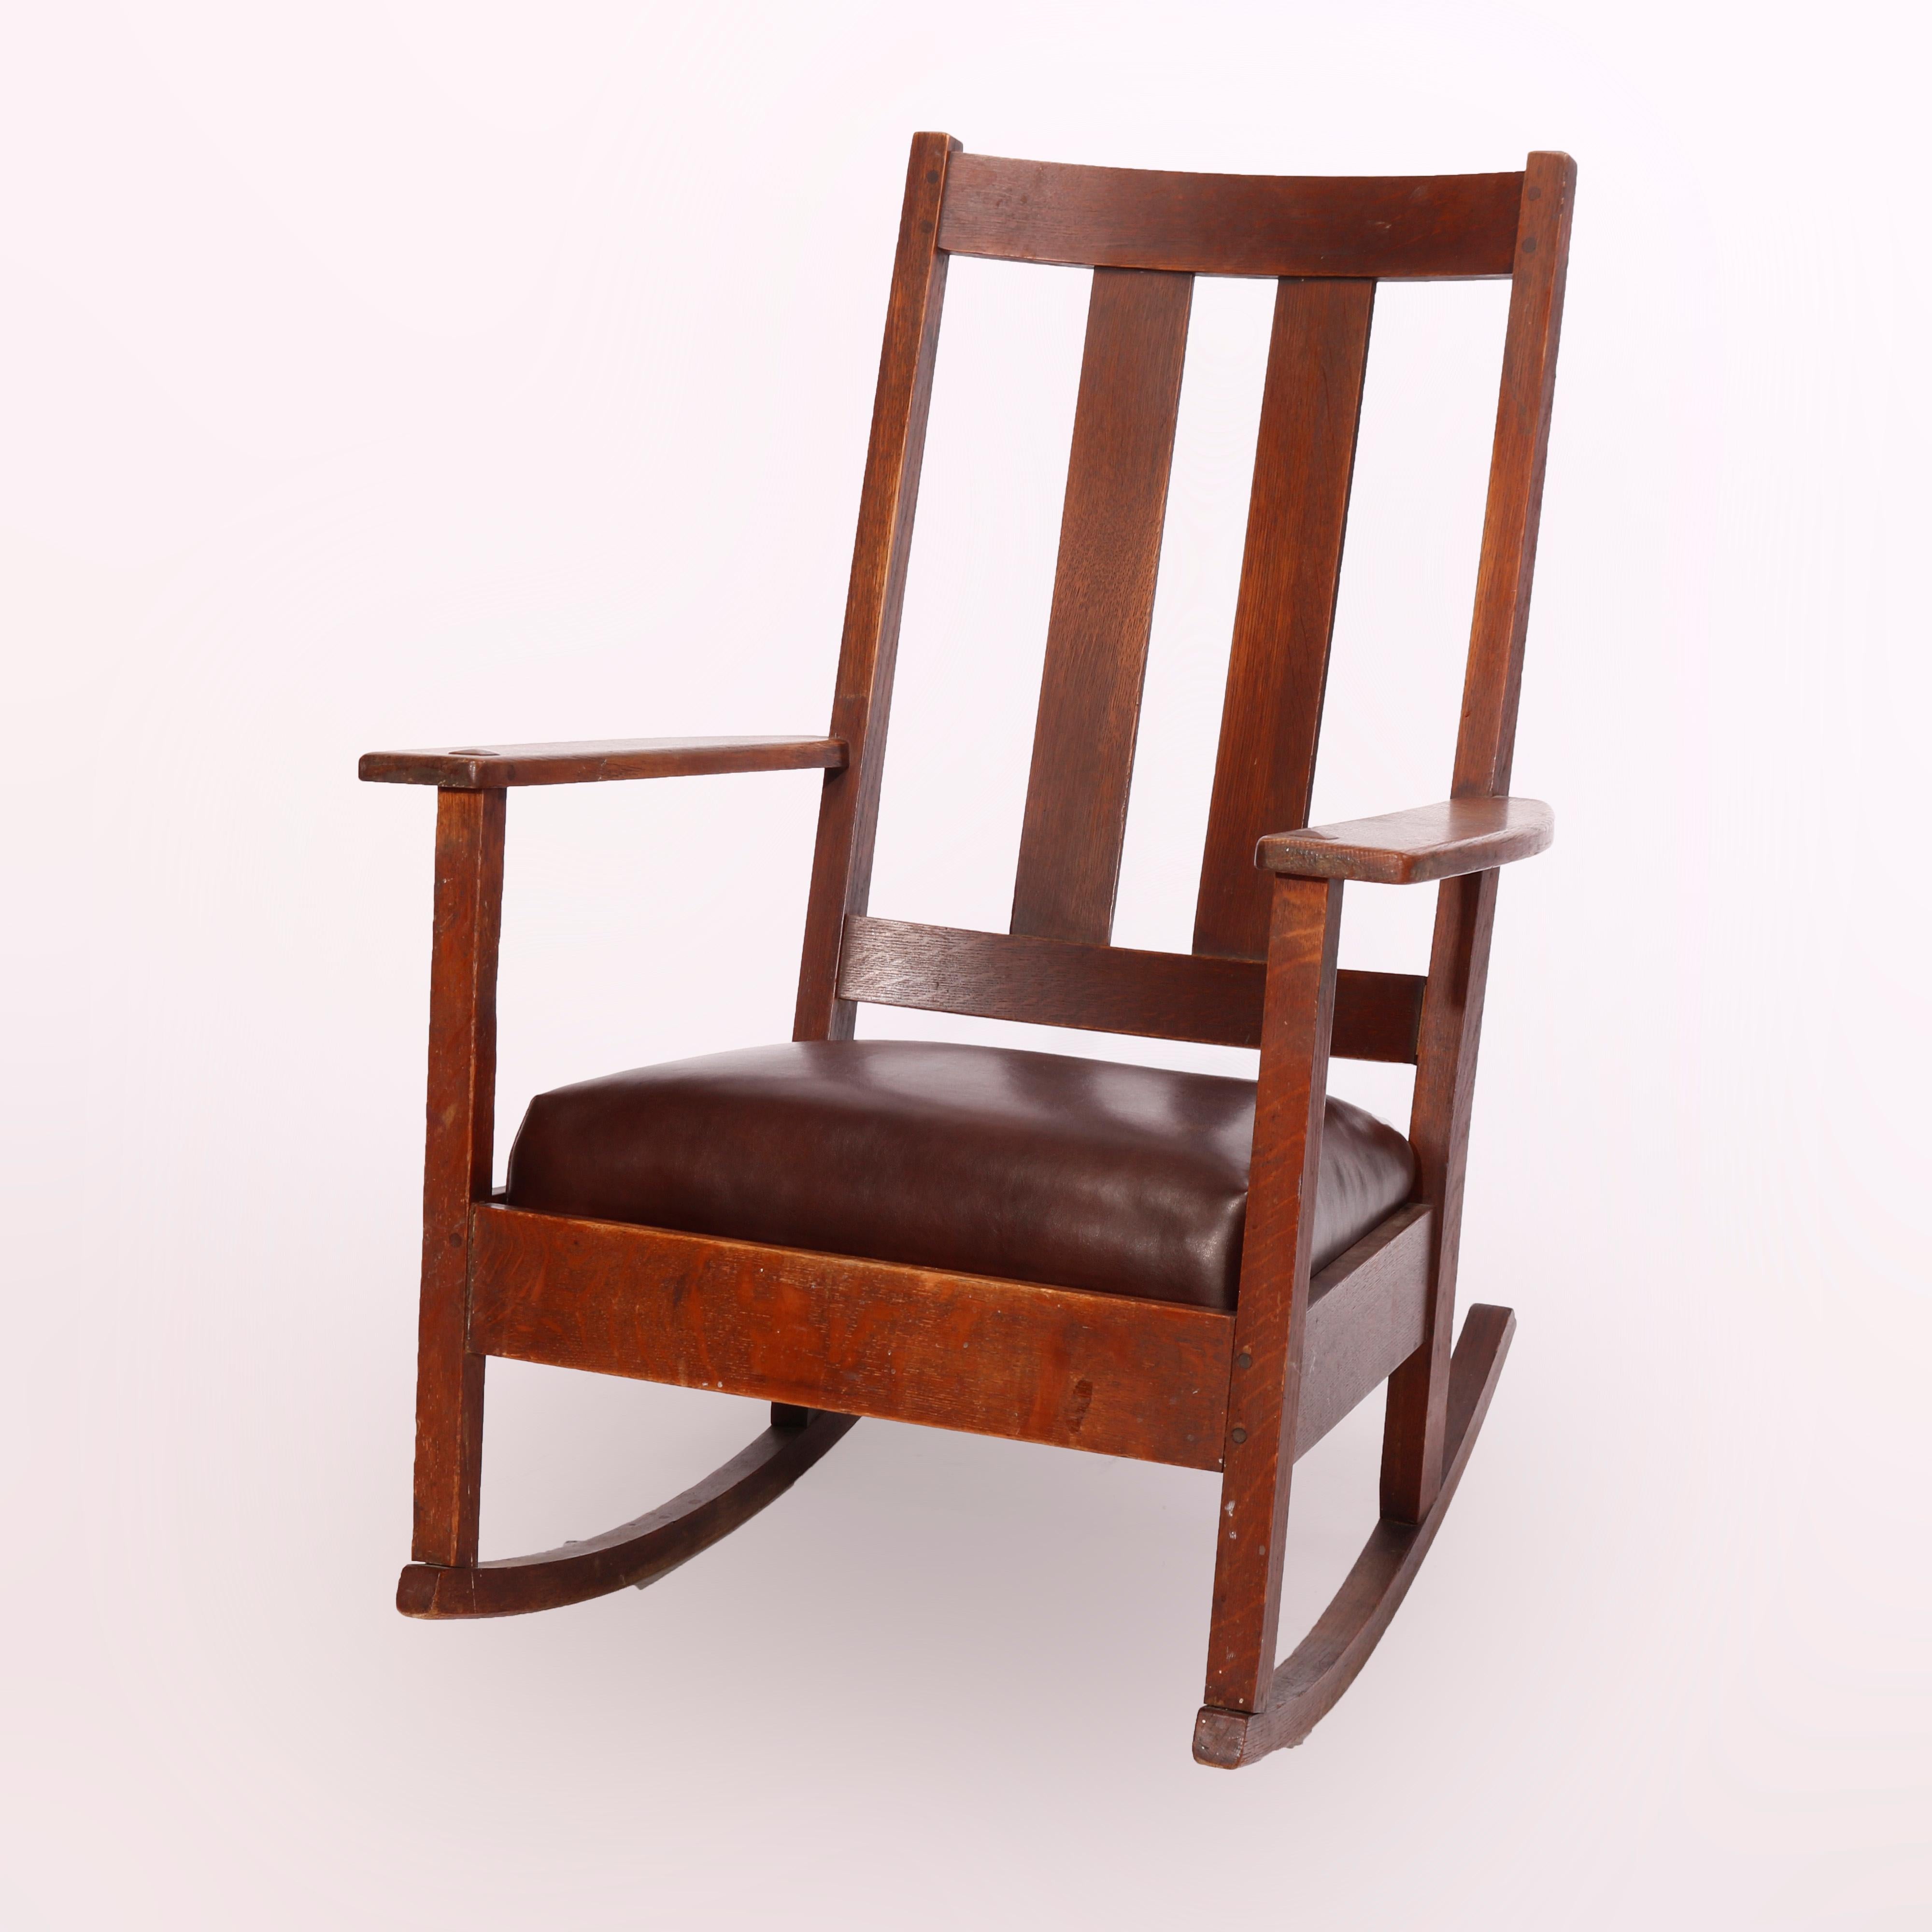 An antique Arts & Crafts rocking chair by Limbert offers oak construction with slat back and cushioned seat, signed Limbert, c1910

Measures - 37.75'' H x 27.75'' W x 33'' D; 14.5'' seat height.